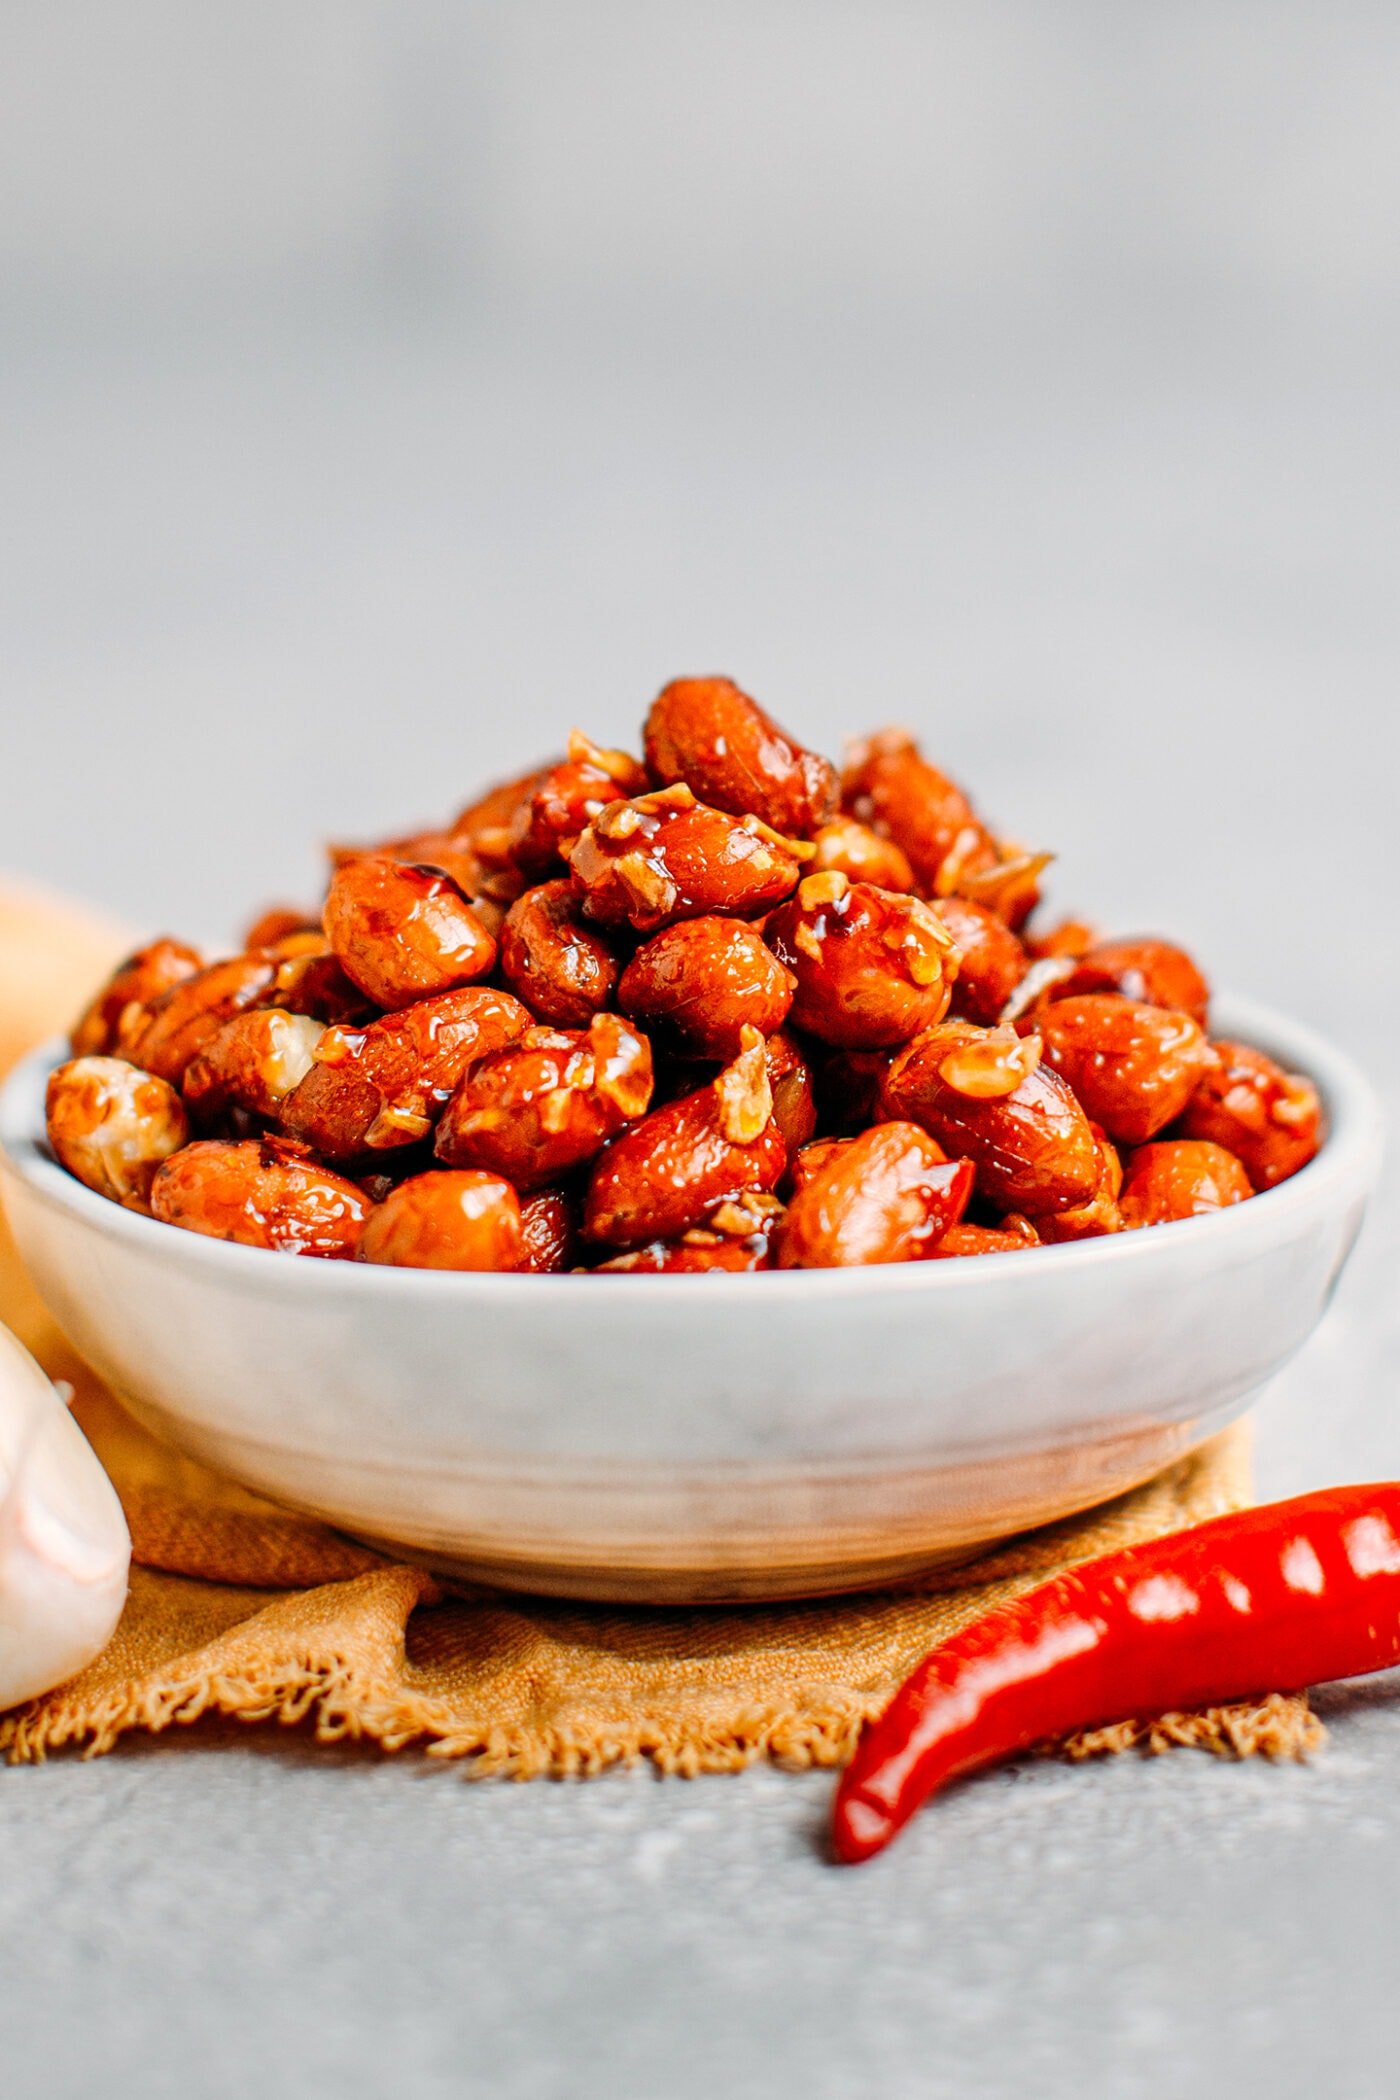 Vietnamese peanuts coated with chili and garlic.